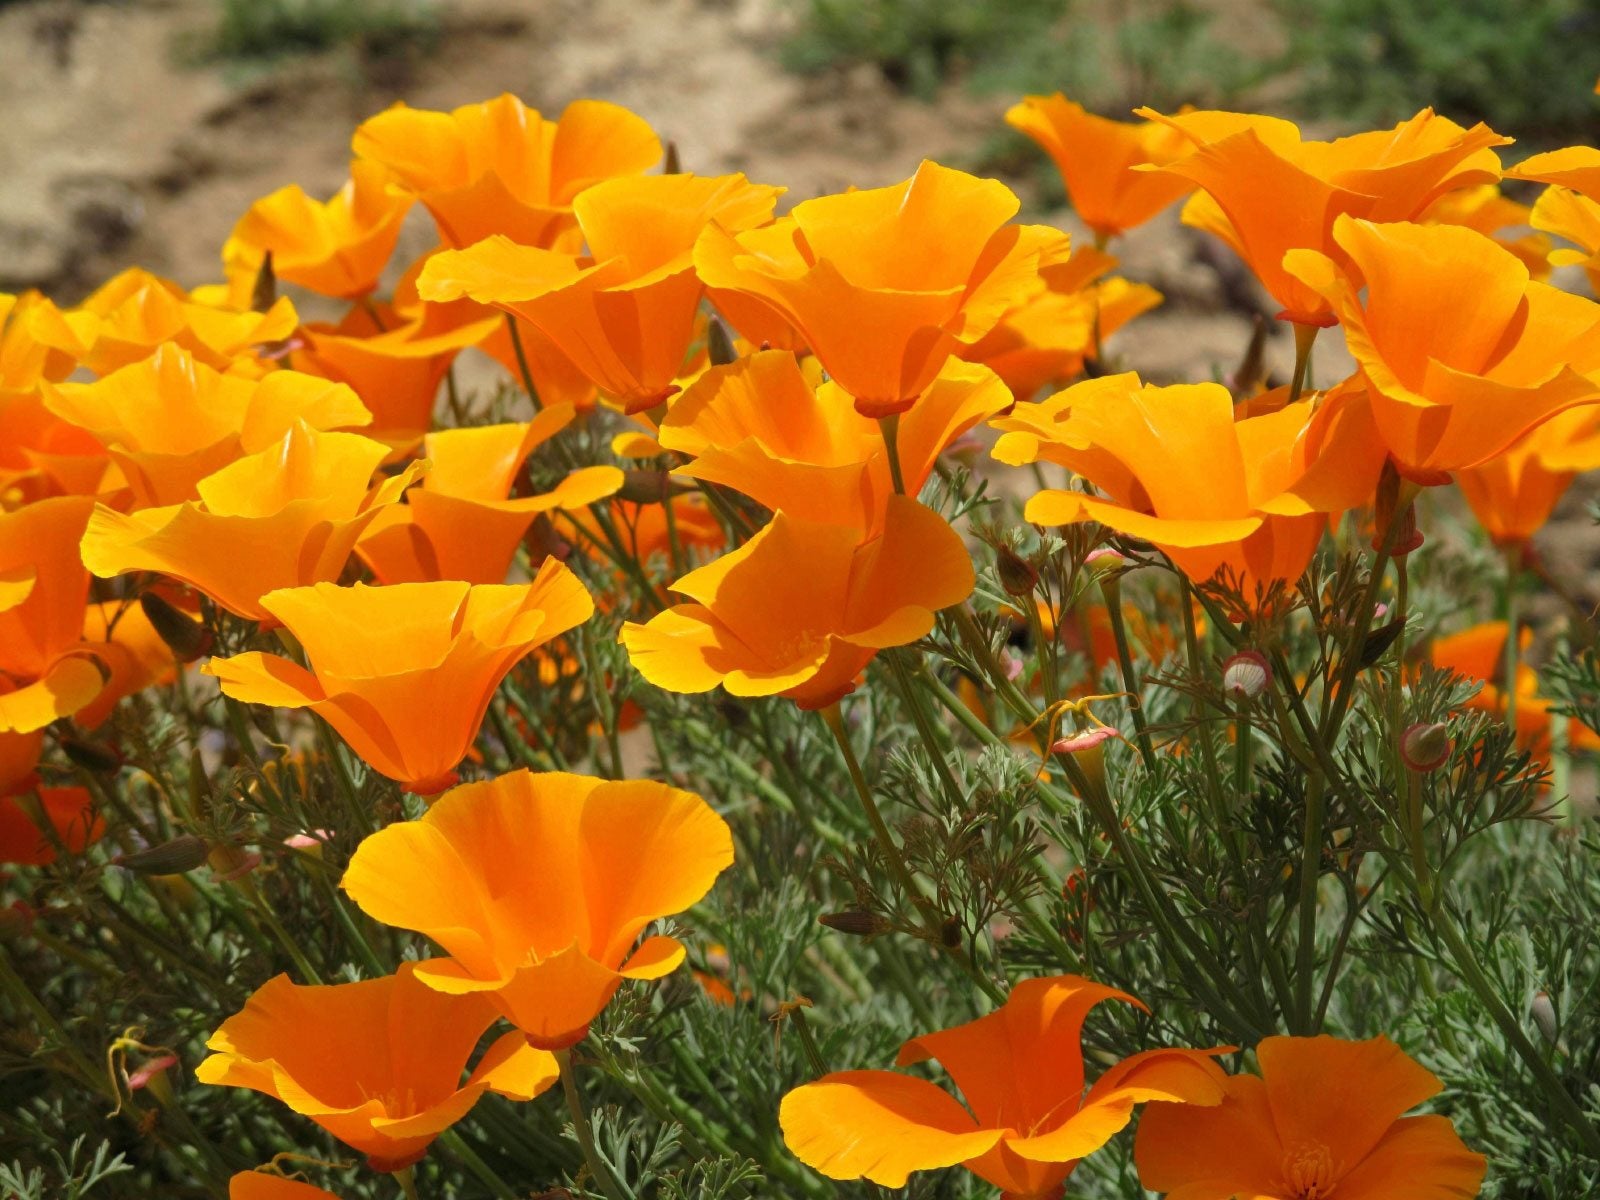 California Poppy Info About Growing California Poppies